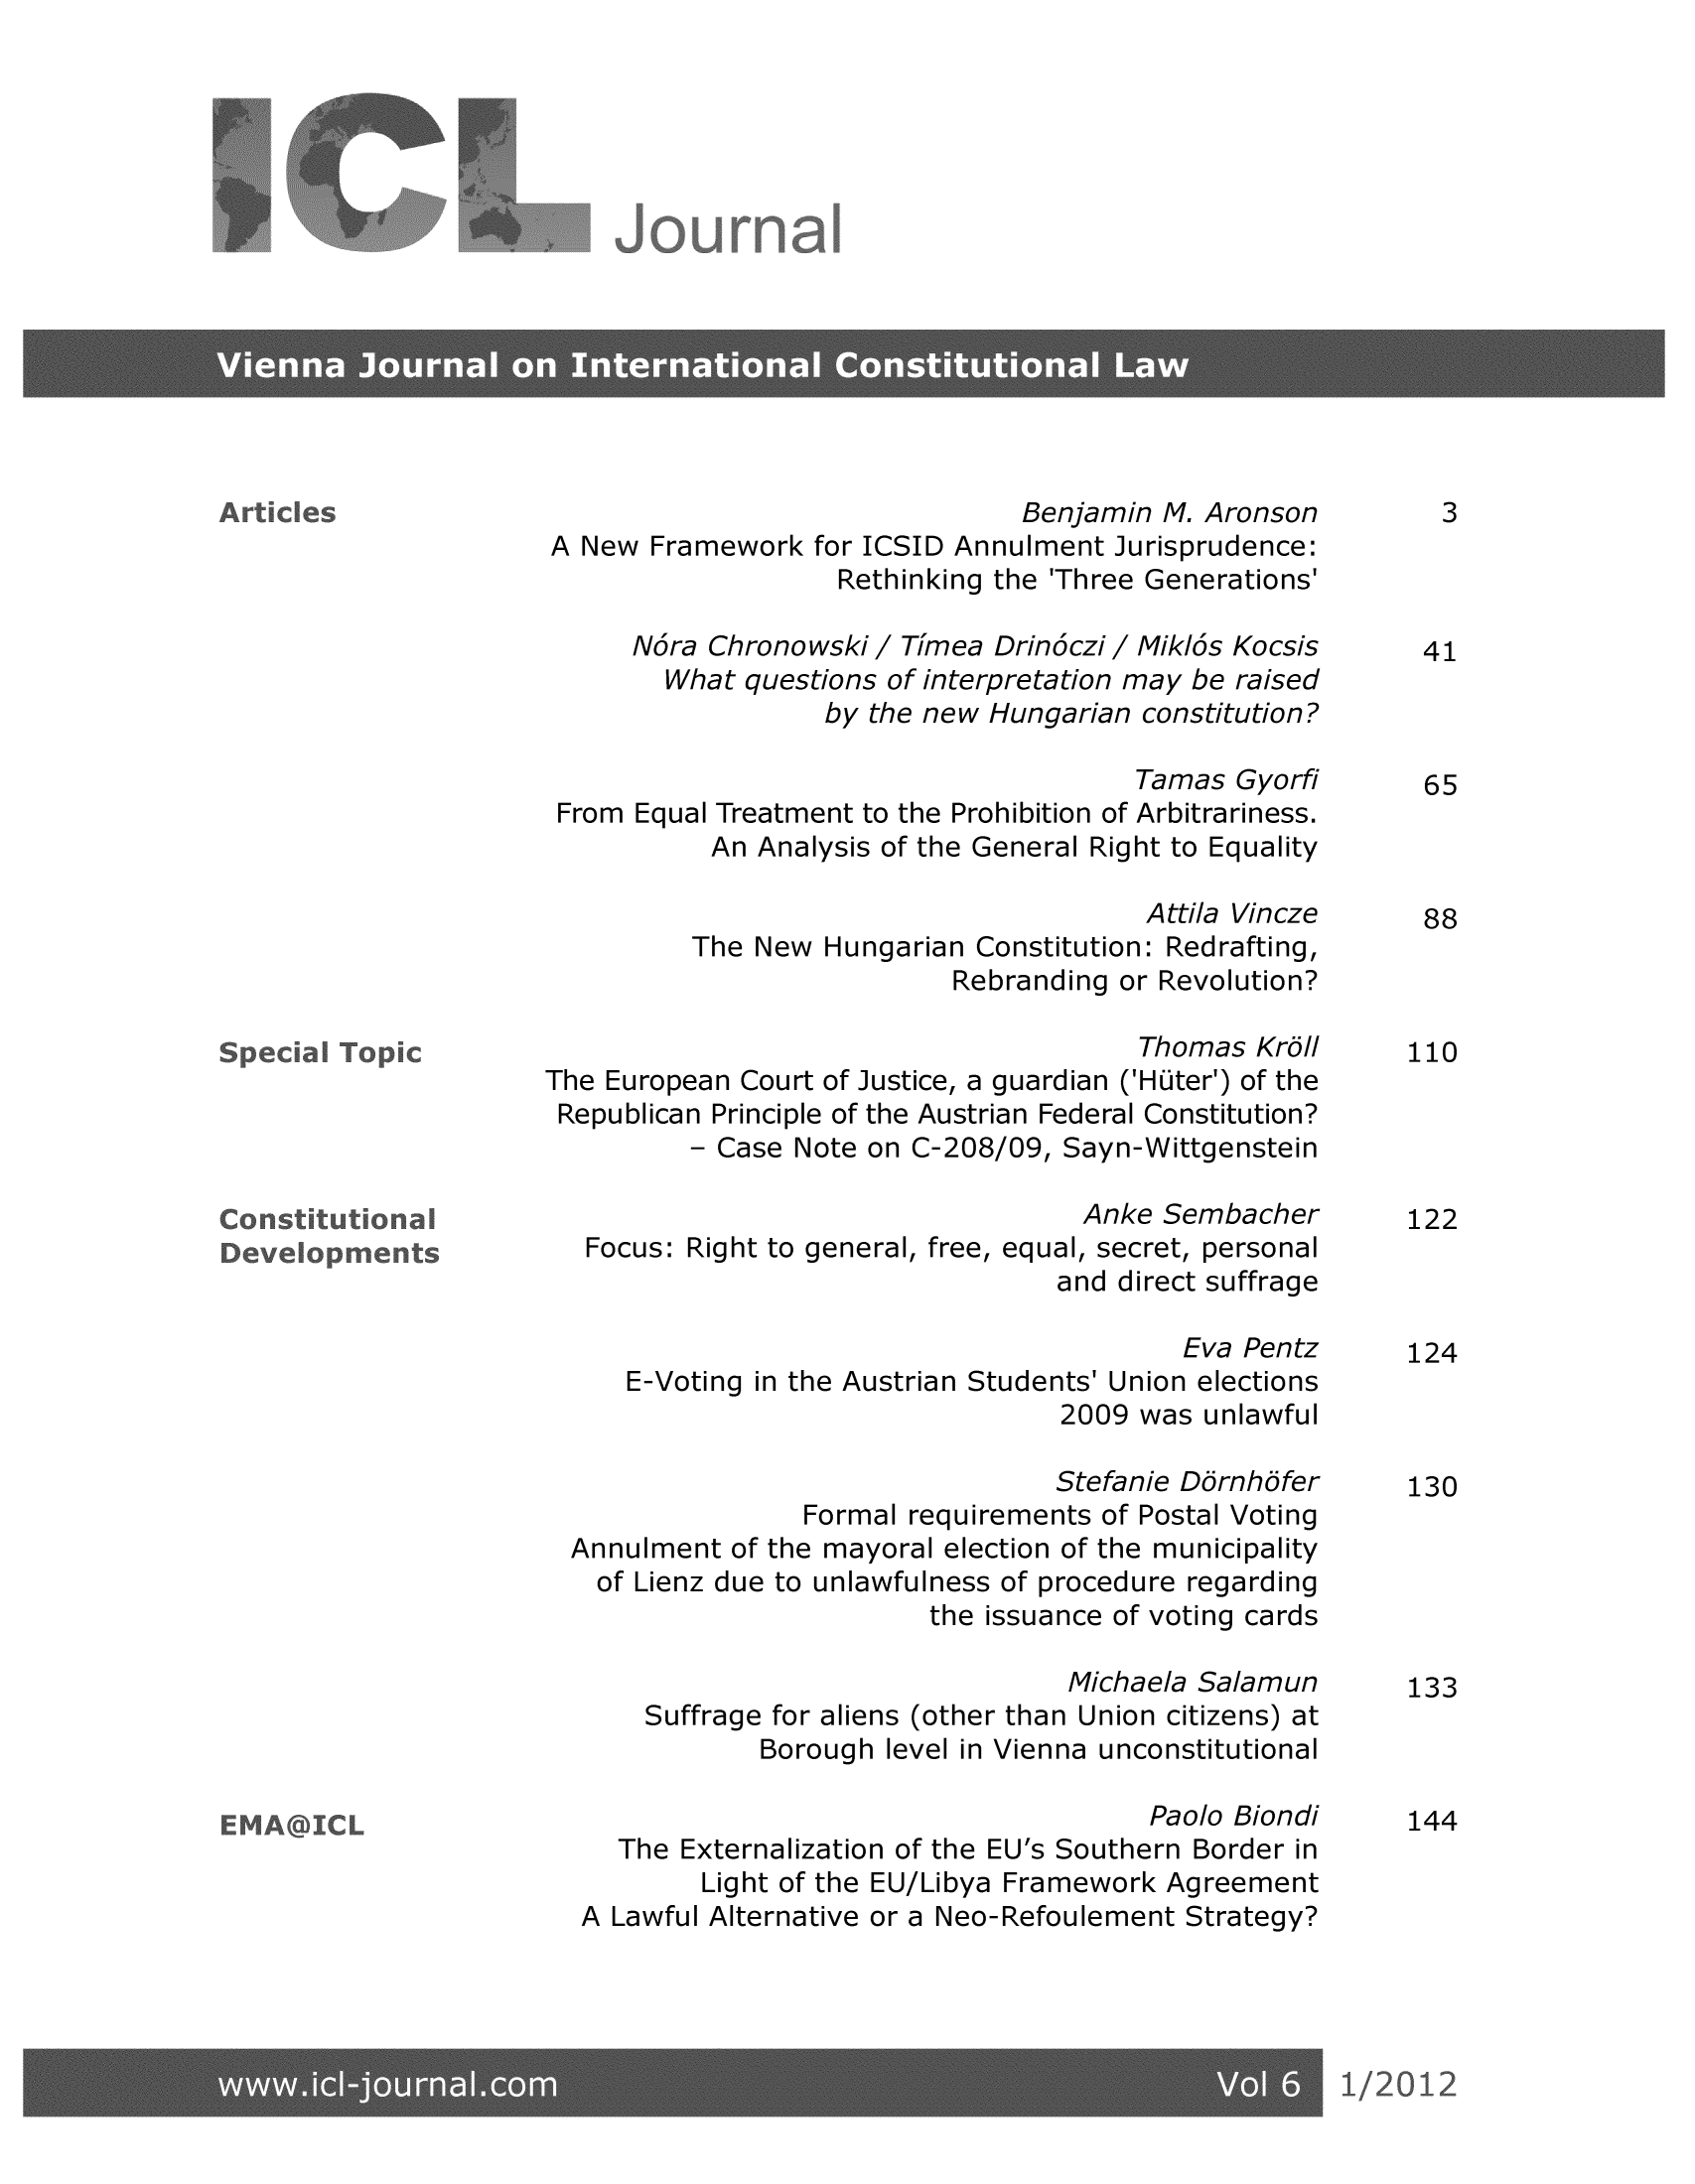 handle is hein.journals/vioincl6 and id is 1 raw text is: Benjamin M. Aronson      3
A New Framework for ICSID Annulment Jurisprudence:
Rethinking the 'Three Generations'
Ndra Chronowski/ Timea Drindczi / MikIos Kocsis  41
What questions of interpretation may be raised
by the new Hungarian constitution?
Tamas Gyorfi     65
From Equal Treatment to the Prohibition of Arbitrariness.
An Analysis of the General Right to Equality
Attila Vincze    88
The New Hungarian Constitution: Redrafting,
Rebranding or Revolution?
Thomas Krdl    110
The European Court of Justice, a guardian ('HOter') of the
Republican Principle of the Austrian Federal Constitution?
- Case Note on C-208/09, Sayn-Wittgenstein
Anke Sembacher      122
Focus: Right to general, free, equal, secret, personal
and direct suffrage
Eva Pentz     124
E-Voting in the Austrian Students' Union elections
2009 was unlawful
Stefanie Ddrnhdfer   130
Formal requirements of Postal Voting
Annulment of the mayoral election of the municipality
of Lienz due to unlawfulness of procedure regarding
the issuance of voting cards
Michaela Salamun     133
Suffrage for aliens (other than Union citizens) at
Borough level in Vienna unconstitutional
Paolo Biondi    144
The Externalization of the EU's Southern Border in
Light of the EU/Libya Framework Agreement
A Lawful Alternative or a Neo-Refoulement Strategy?


